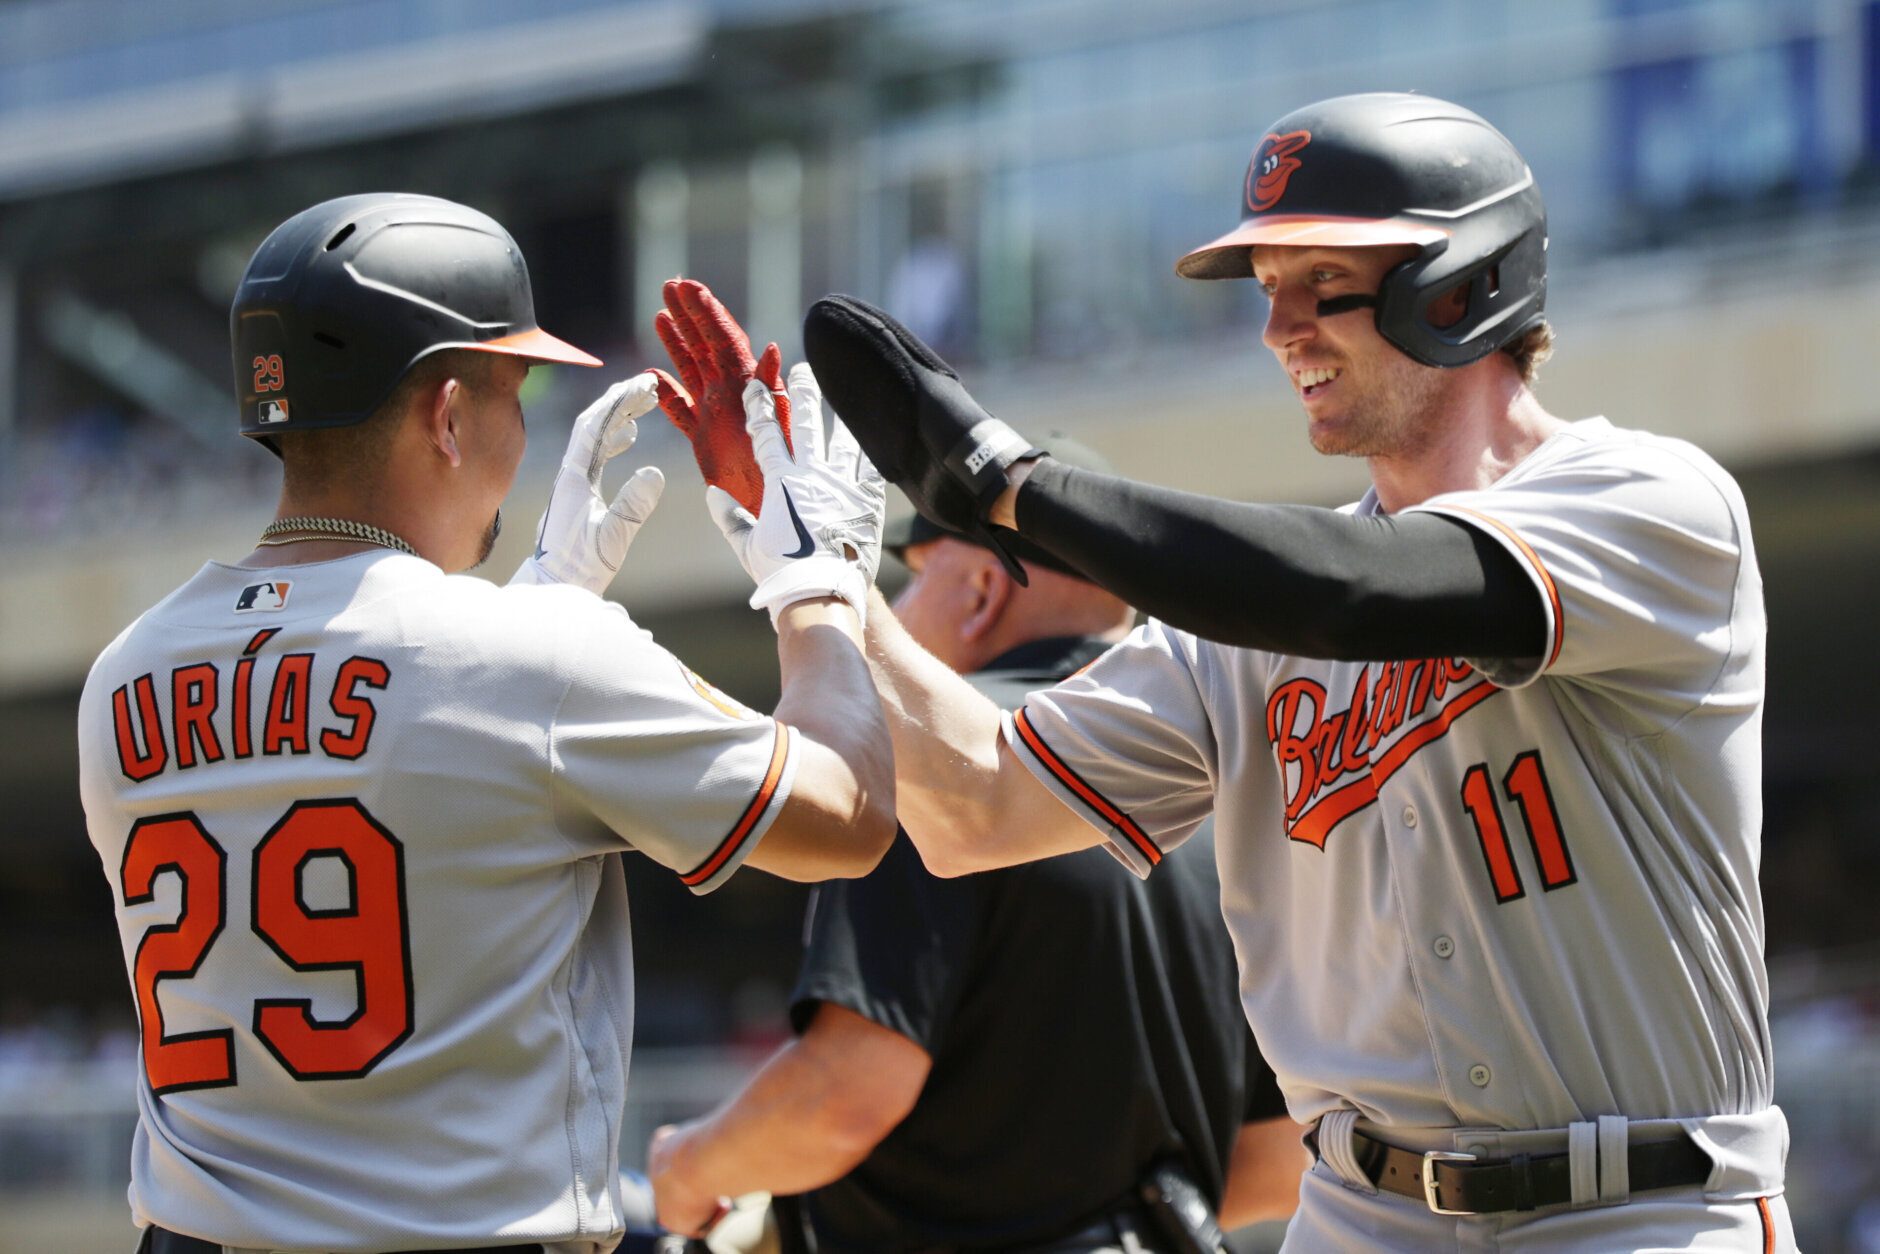 Baltimore Orioles: Tracking Home Runs and Strikeouts